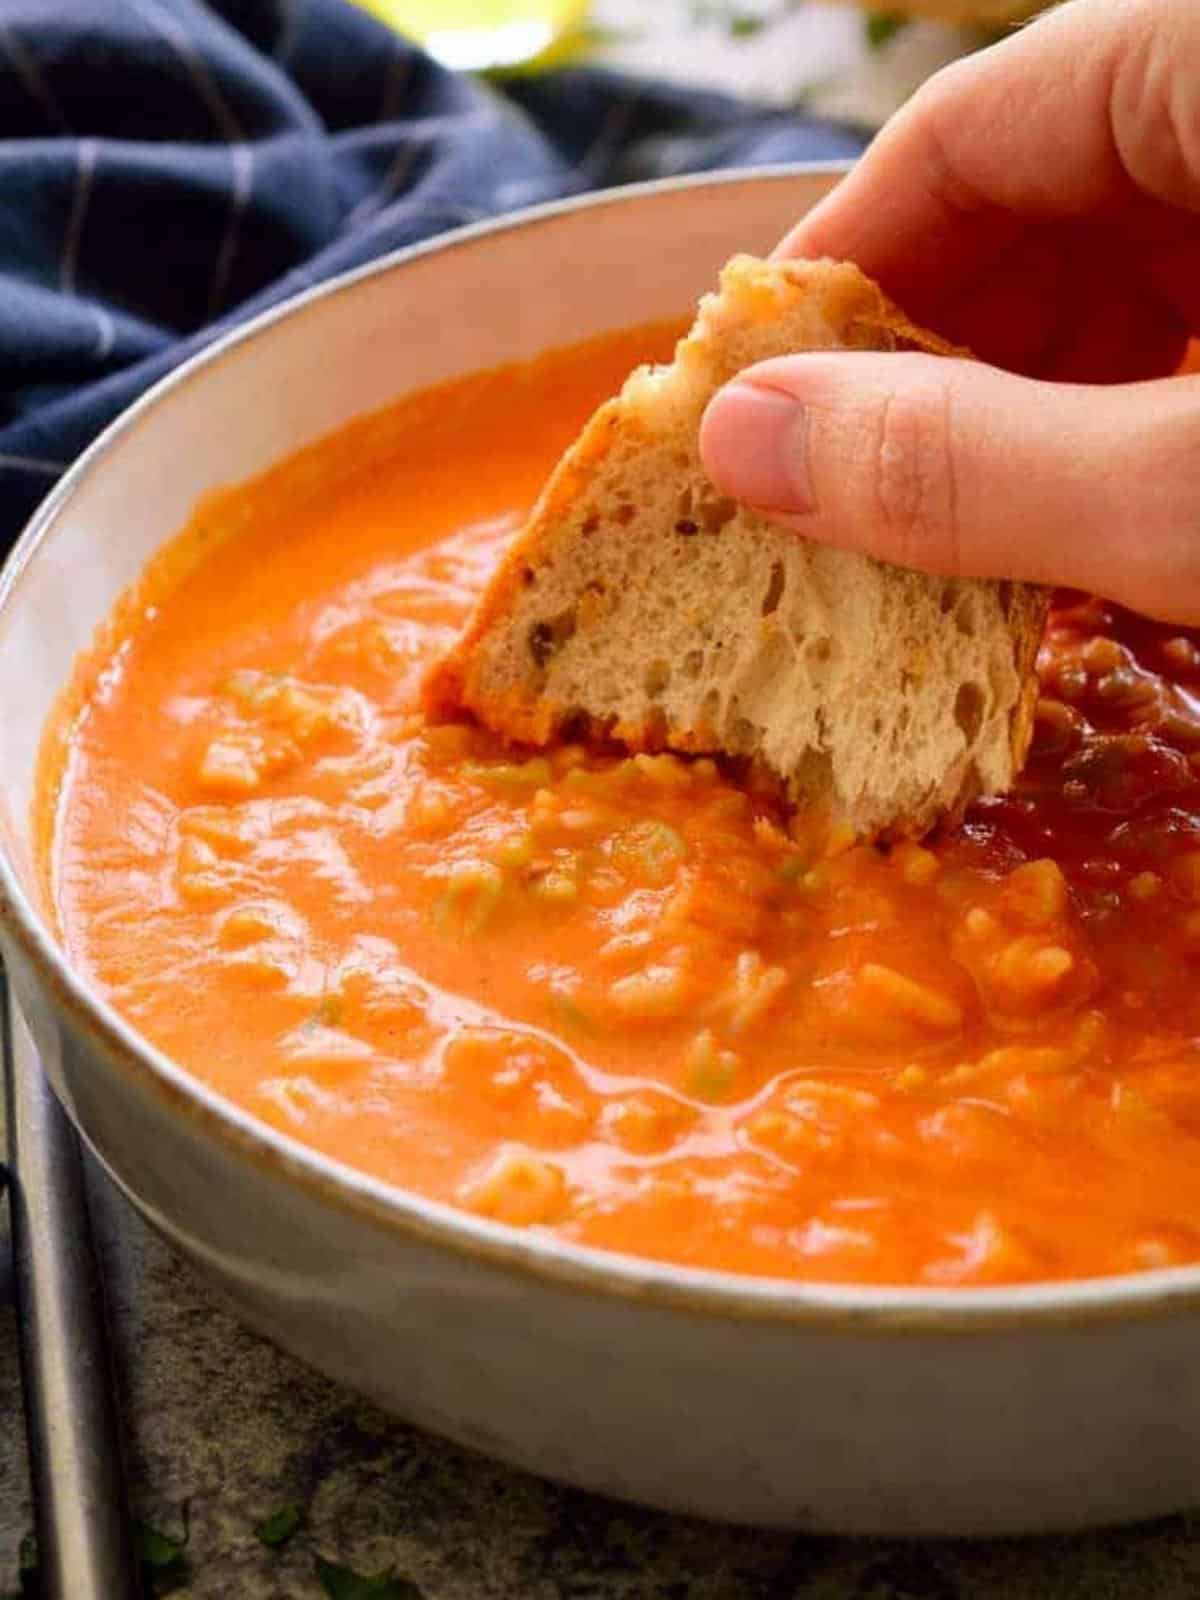 Hand dipping crusty bread into a bowl of tomato soup.